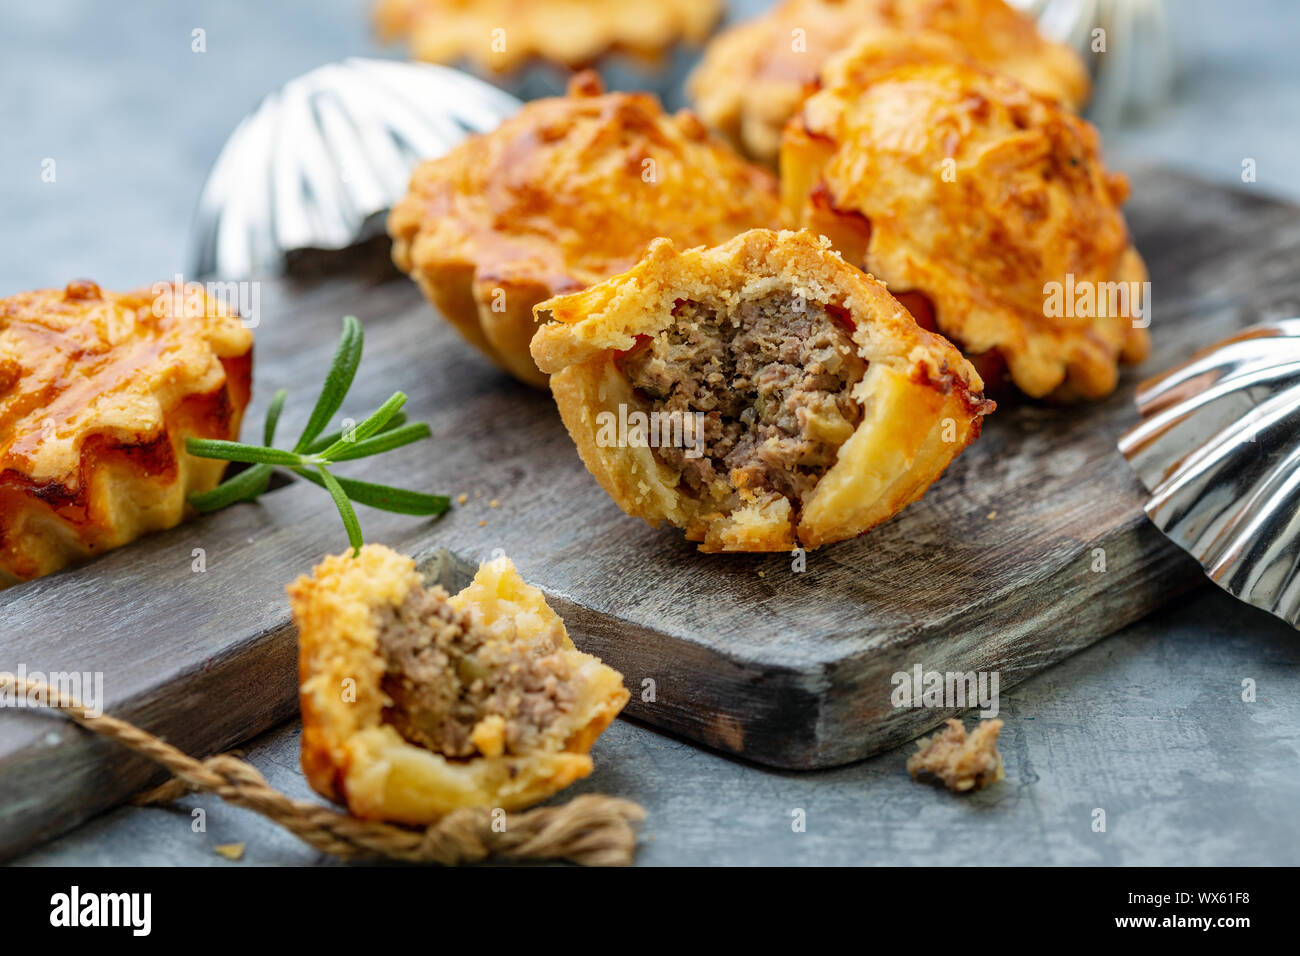 Homemade mini-pies with meat filling. Stock Photo